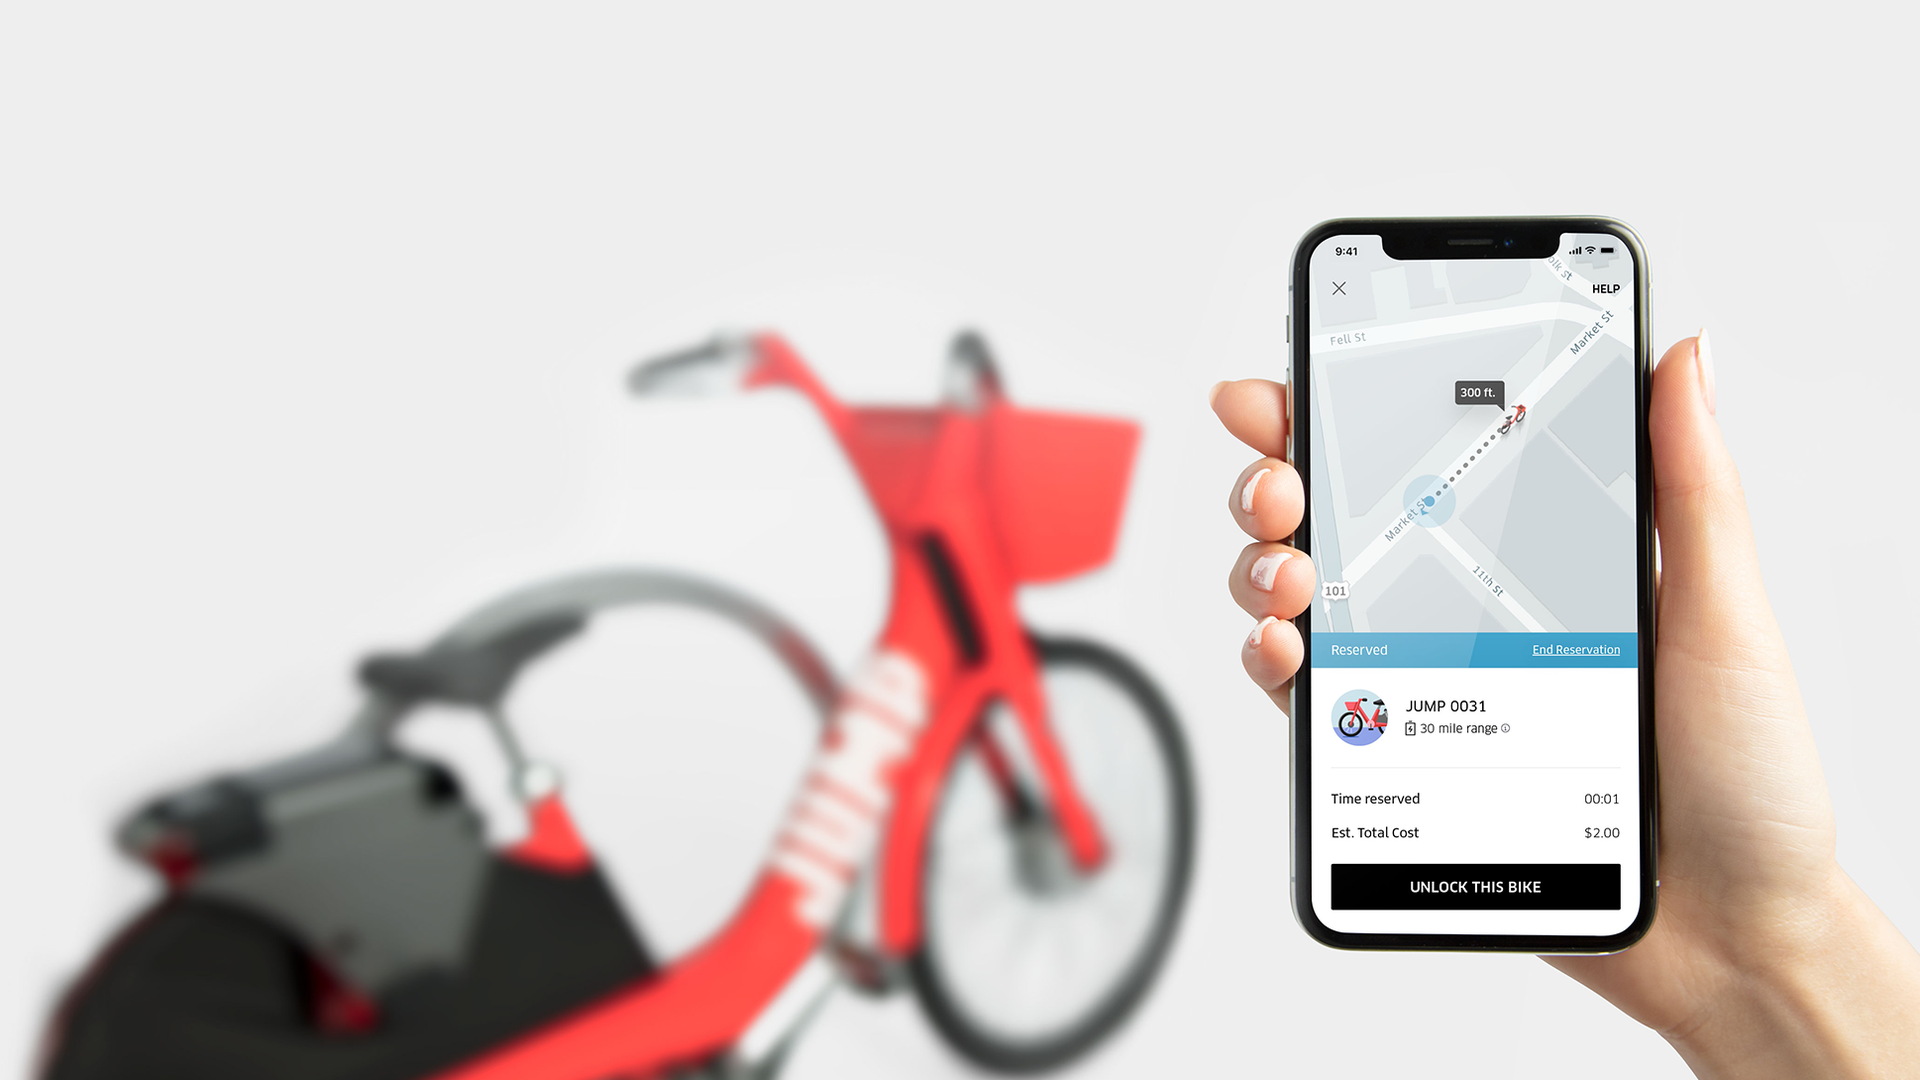 Uber will develop a bicycle rental market